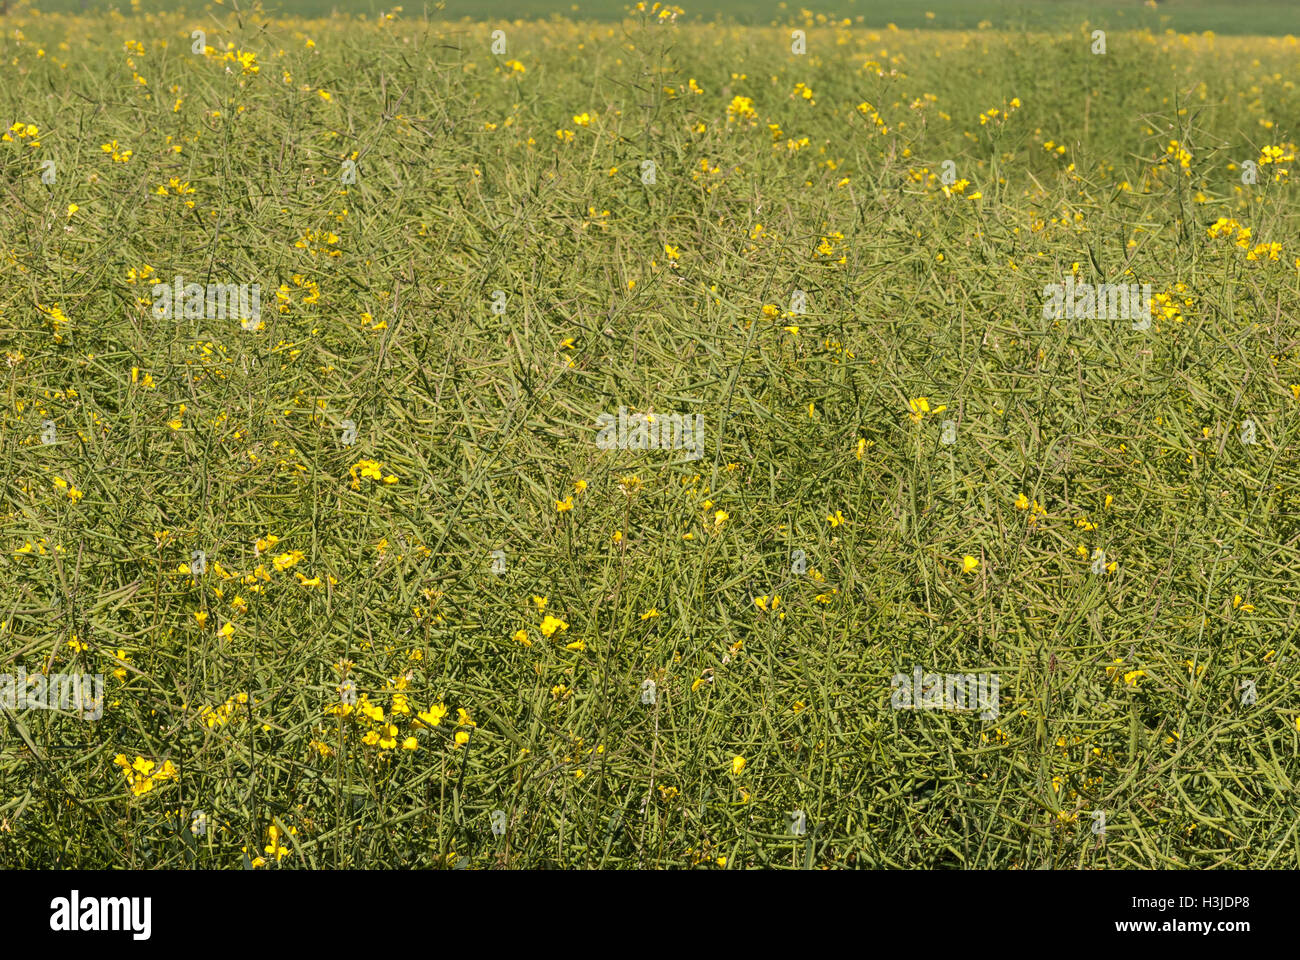 a close up of a ripening canola crop in a rural field Stock Photo